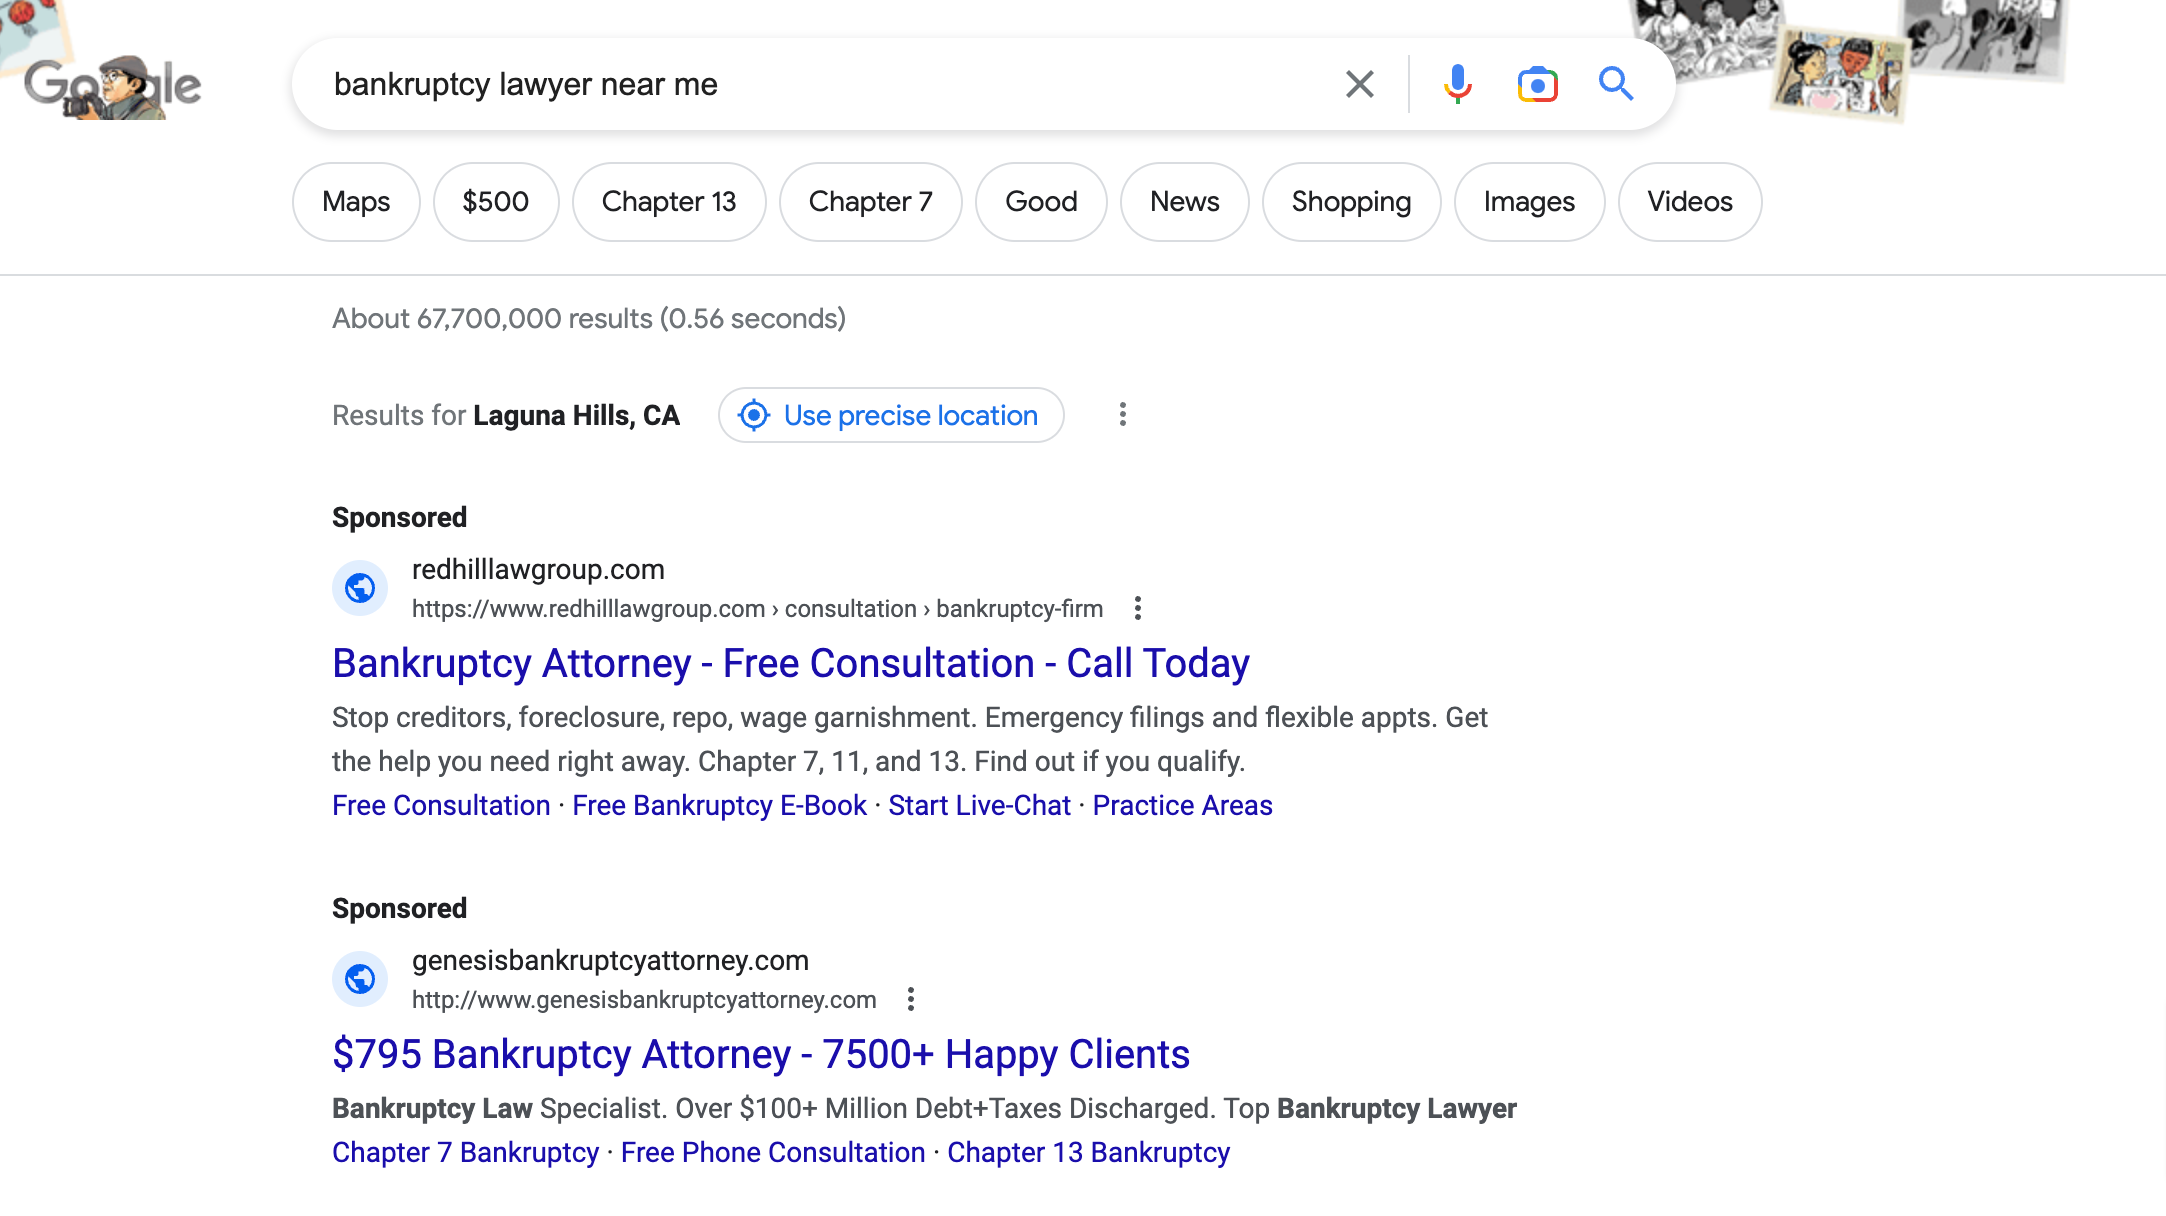 Google search engine results for the search term: bankruptcy lawyer near me.